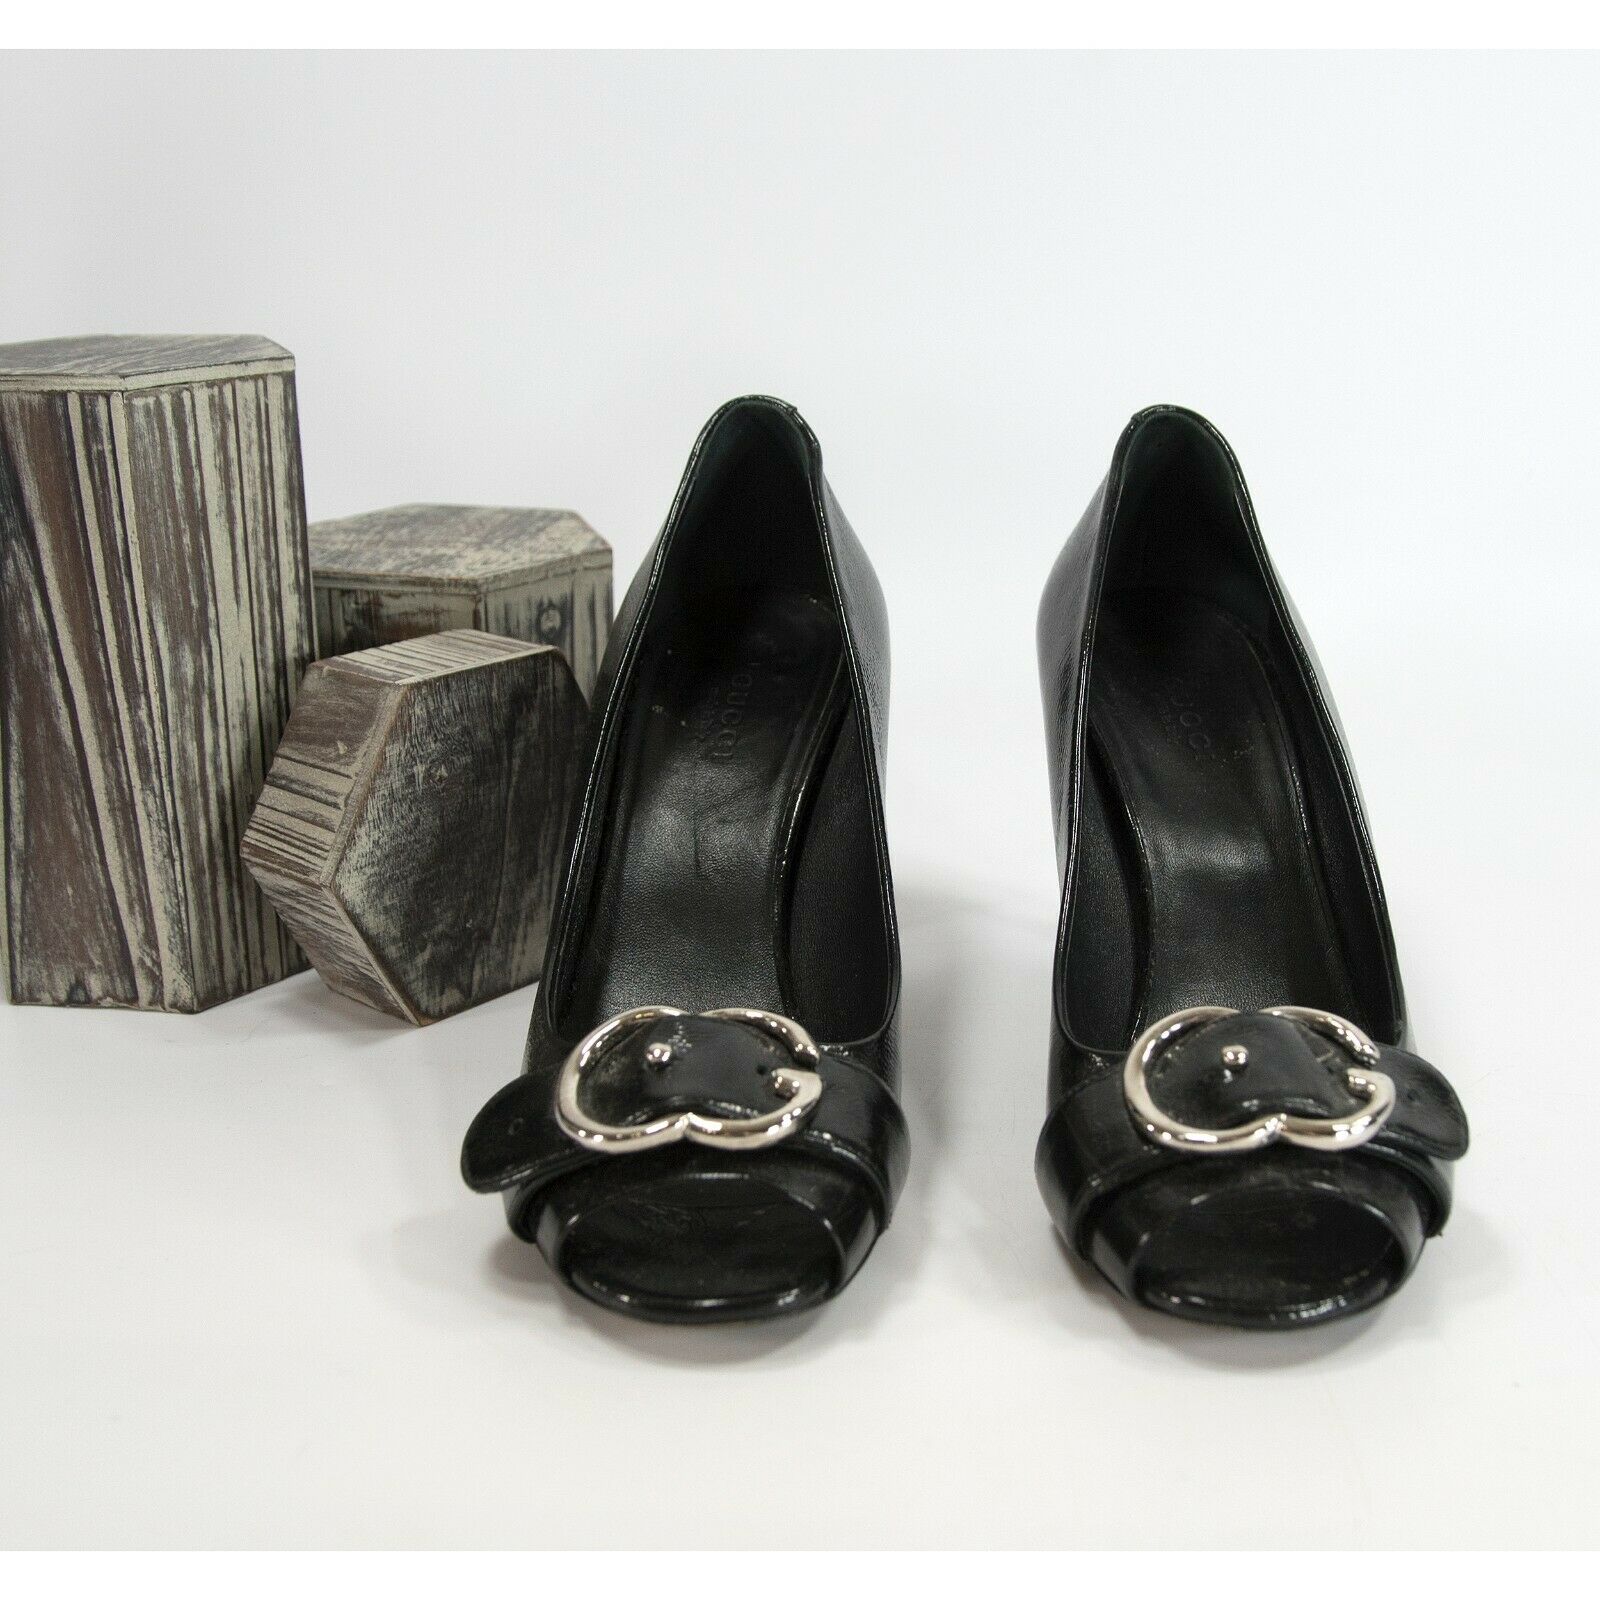 Gucci Black Patent Leather Wedge Sandals Size 39.5 Gucci